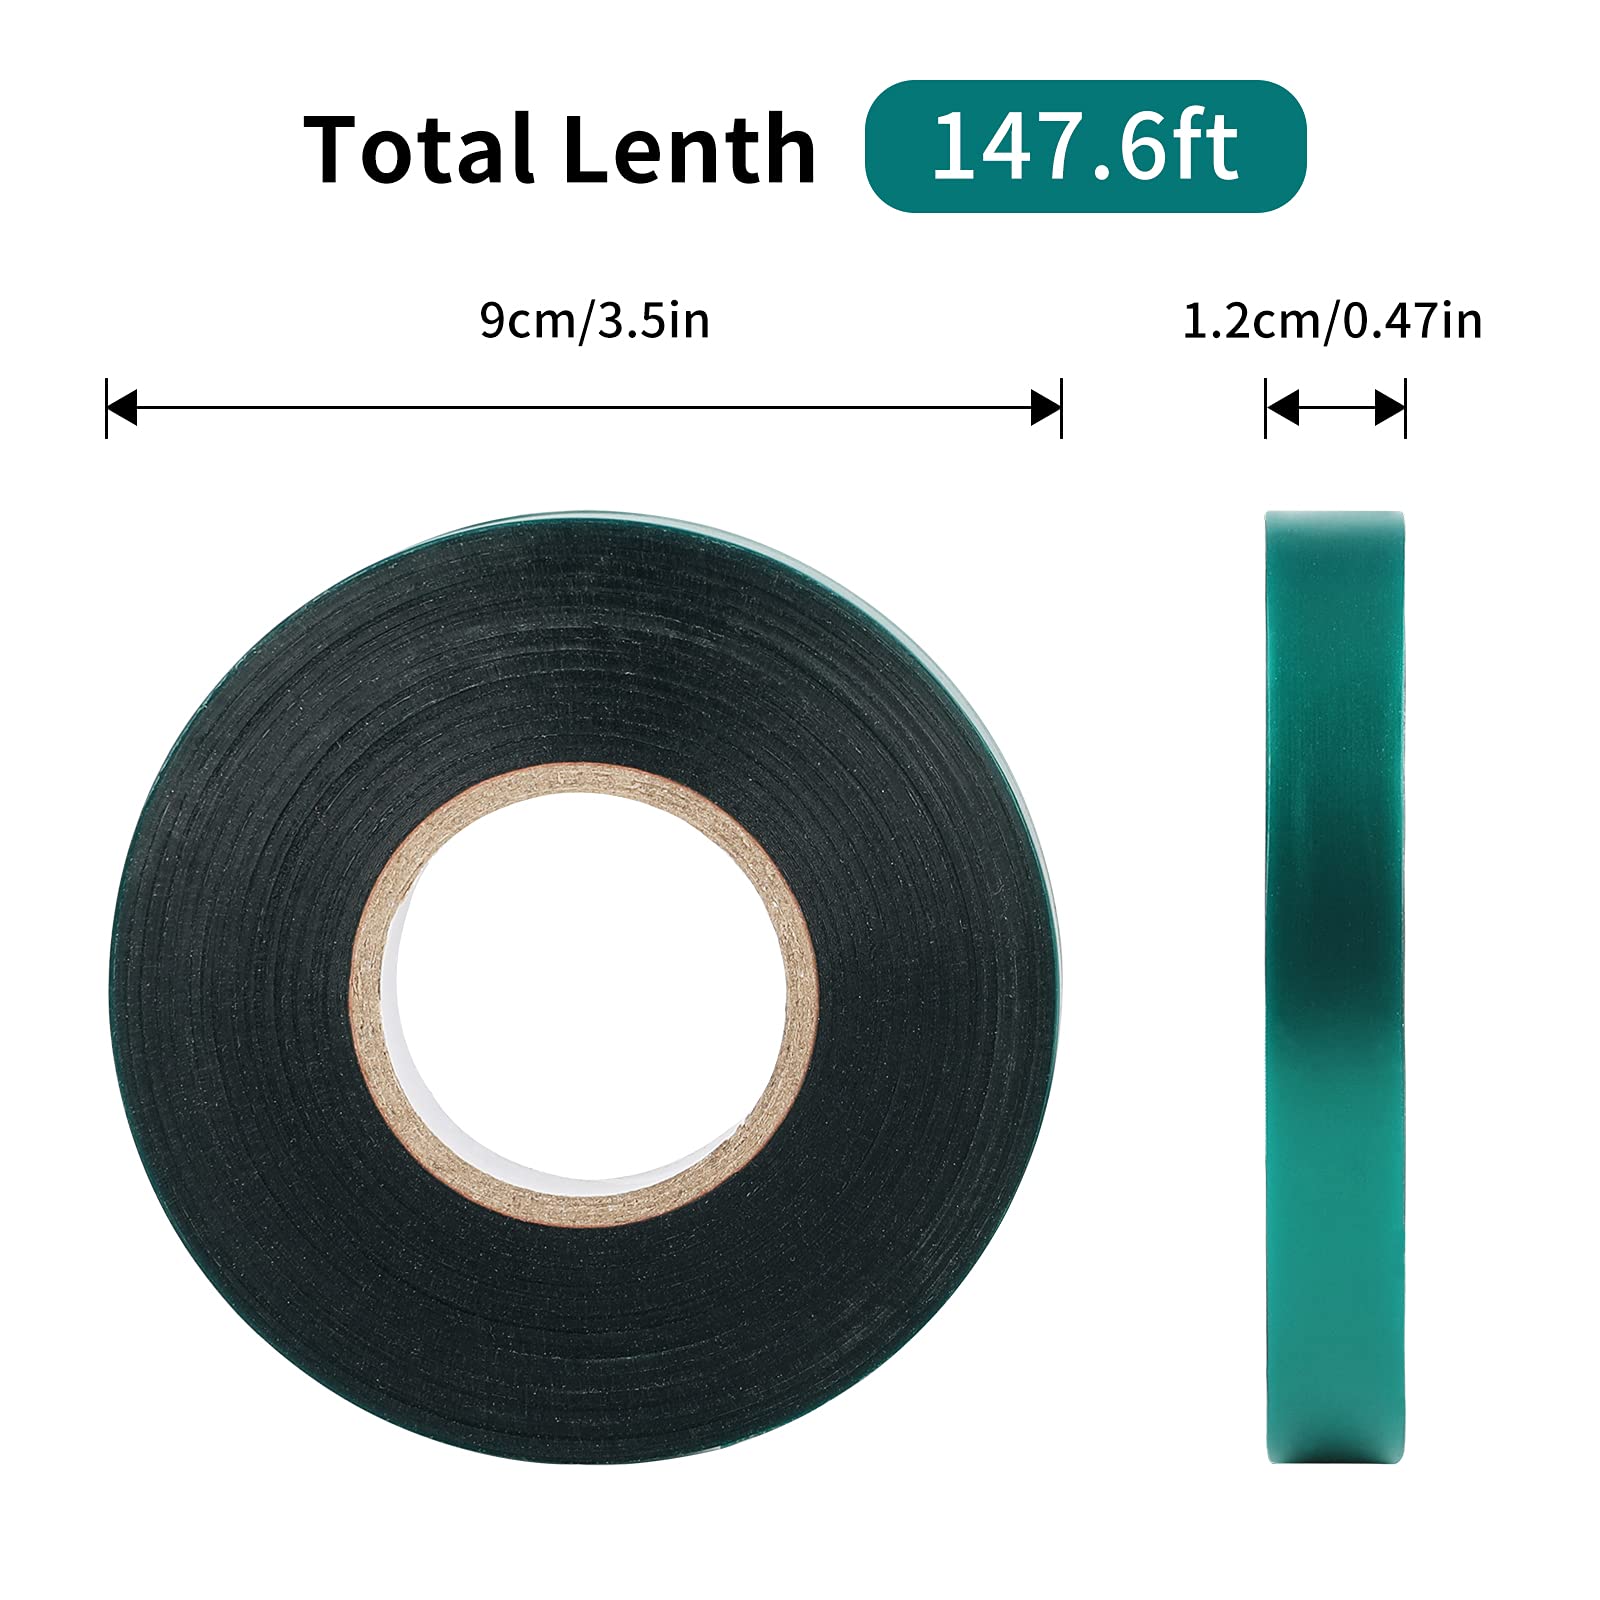 KINGLAKE GARDEN Stretch Tie Tape Roll-2 Rolls Total 300 Feet 1/2" Green Garden Tape,Plant Ribbons Plant Garden Tie for Branches, Climbing Planters, Flowers